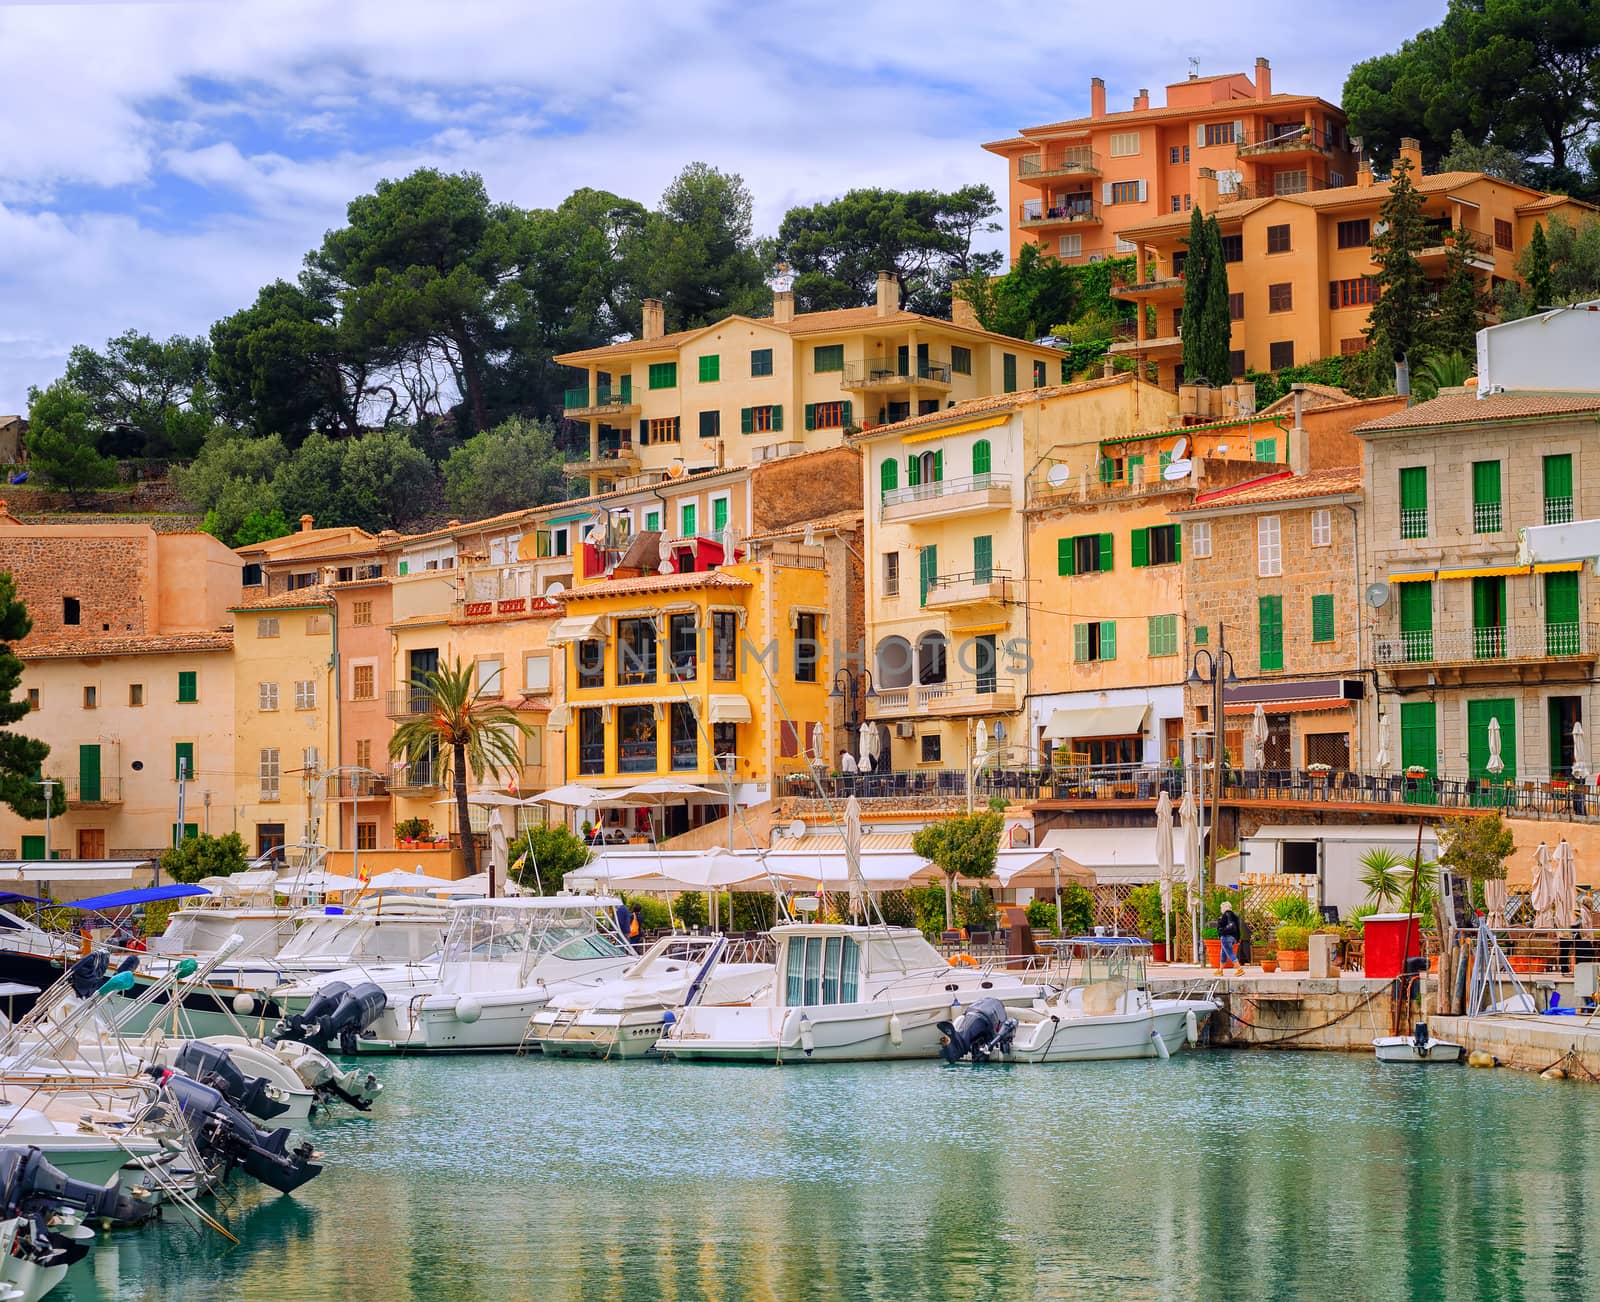 Motor boats and traditional houses in Puerto Soller, Mallorca, Spain by GlobePhotos